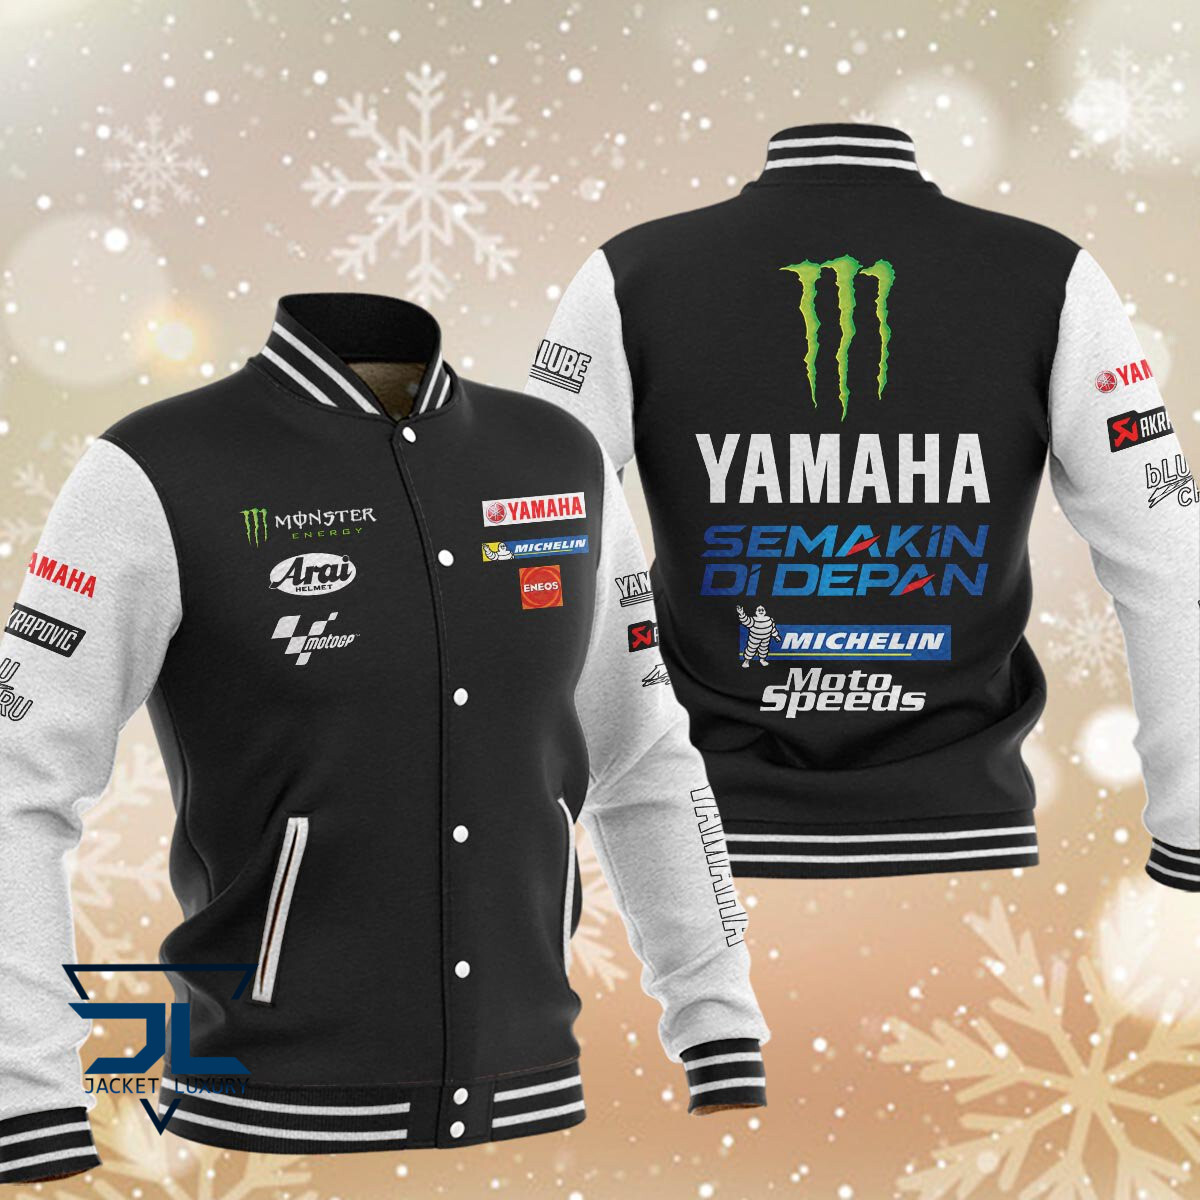 Check these out if you want some cool jacket for holiday 291